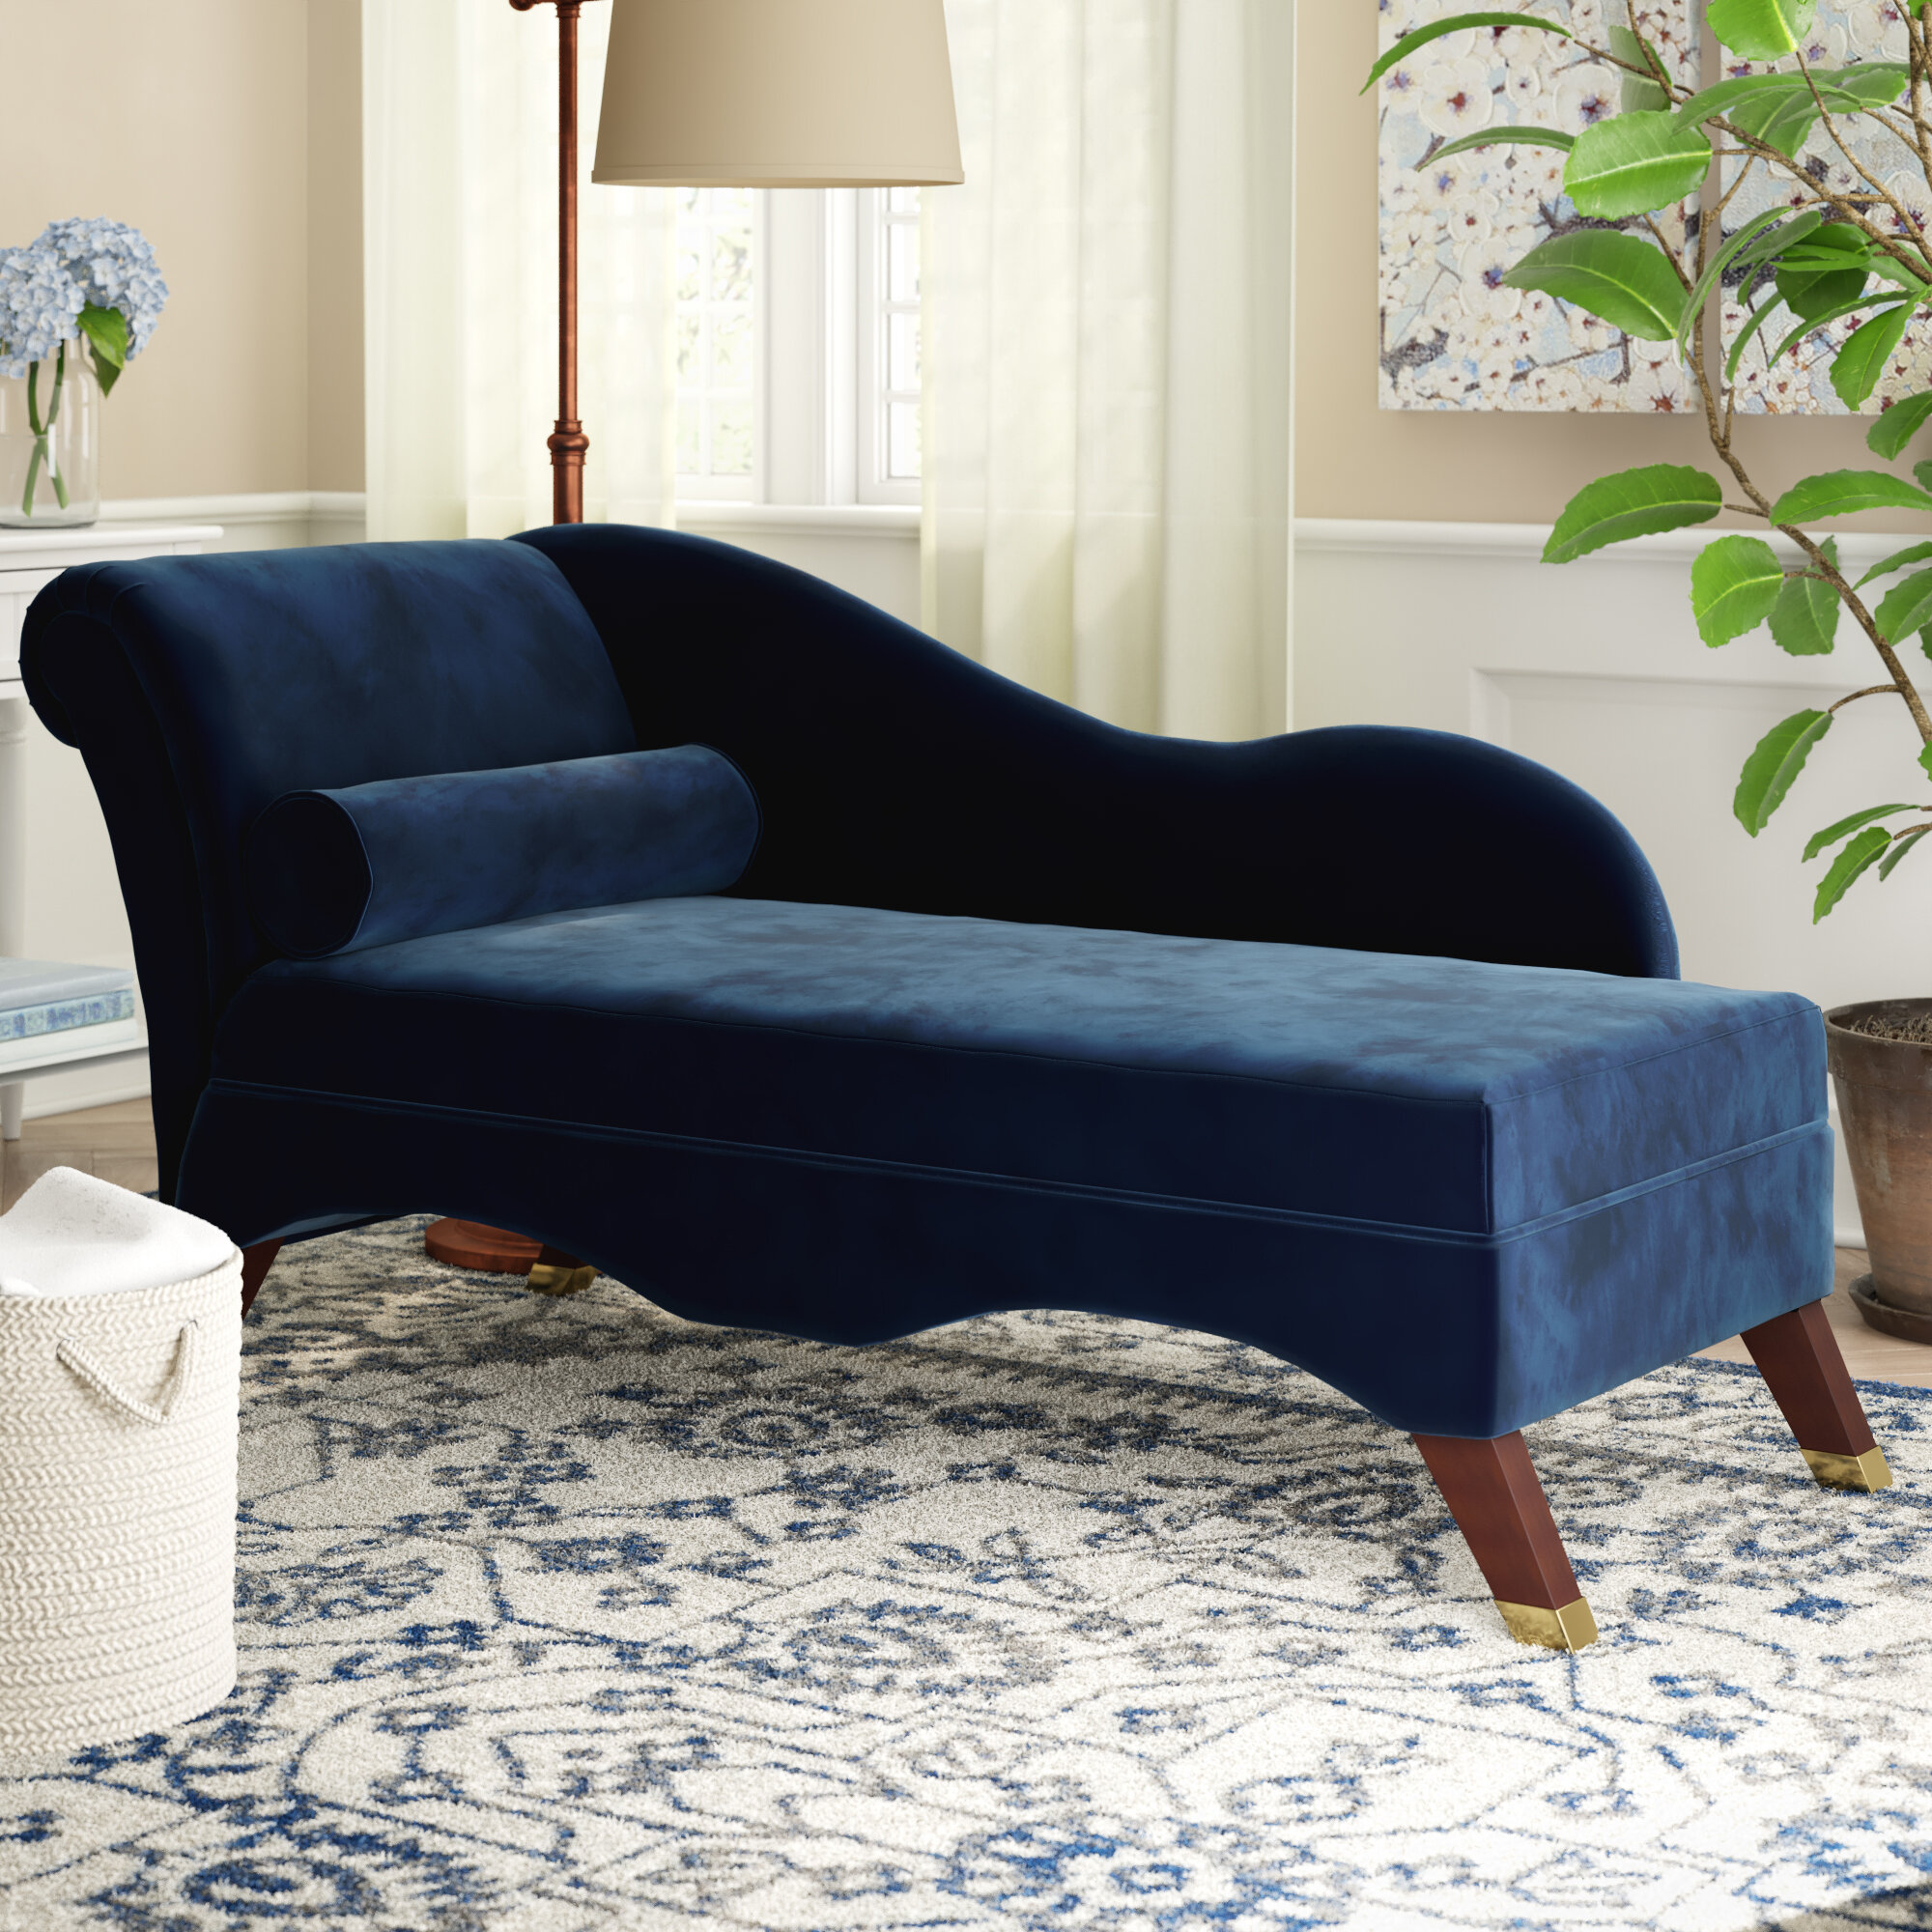 Schumacher Upholstered Chaise Lounge